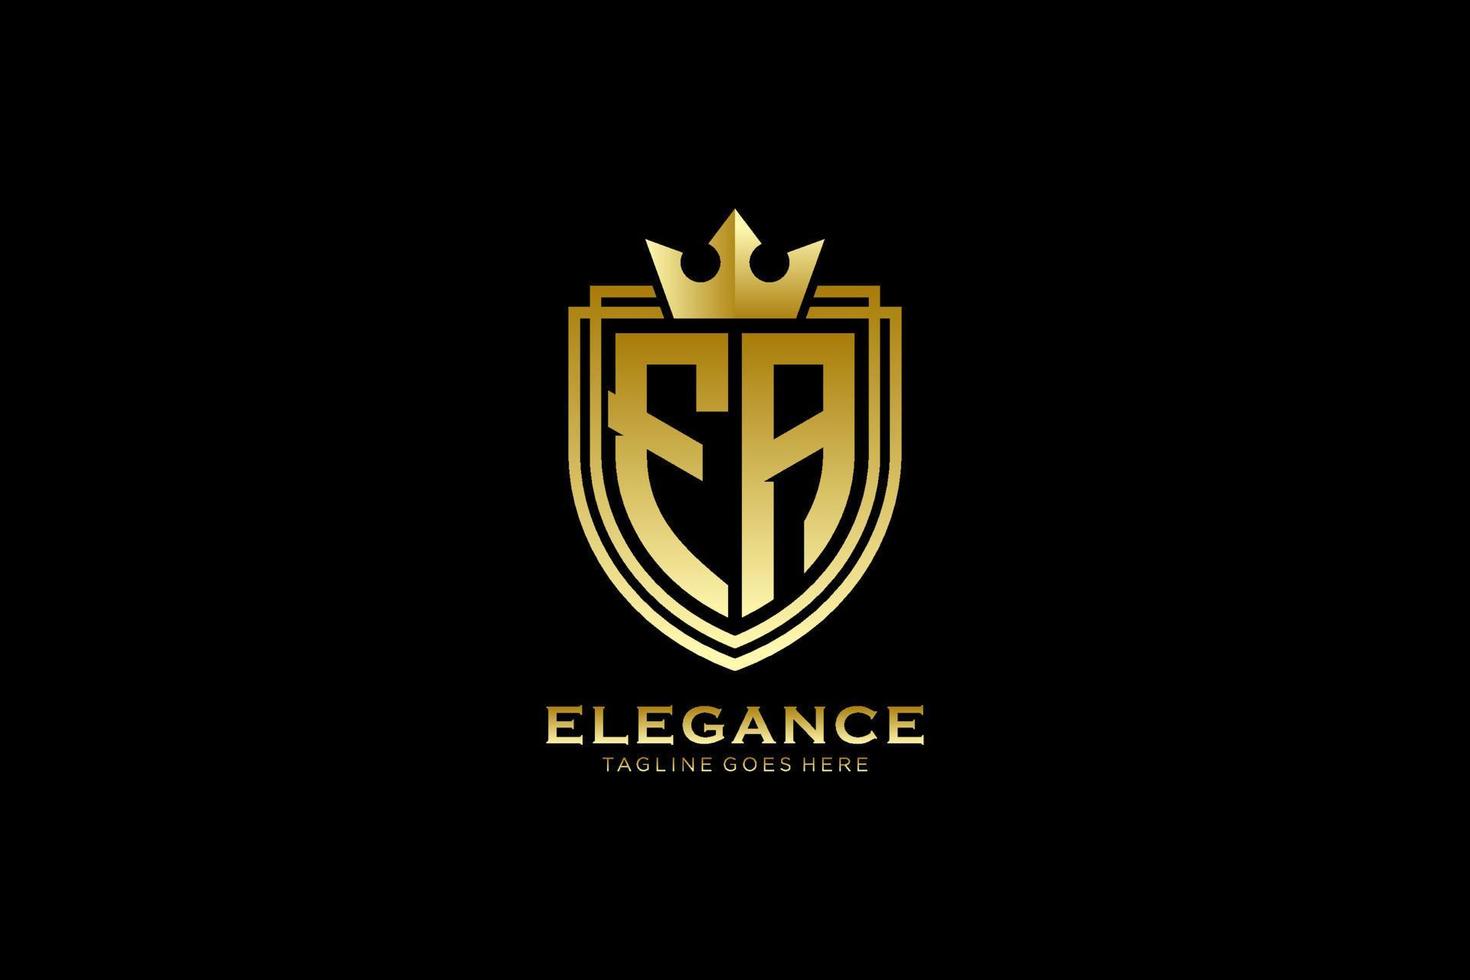 initial FA elegant luxury monogram logo or badge template with scrolls and royal crown - perfect for luxurious branding projects vector